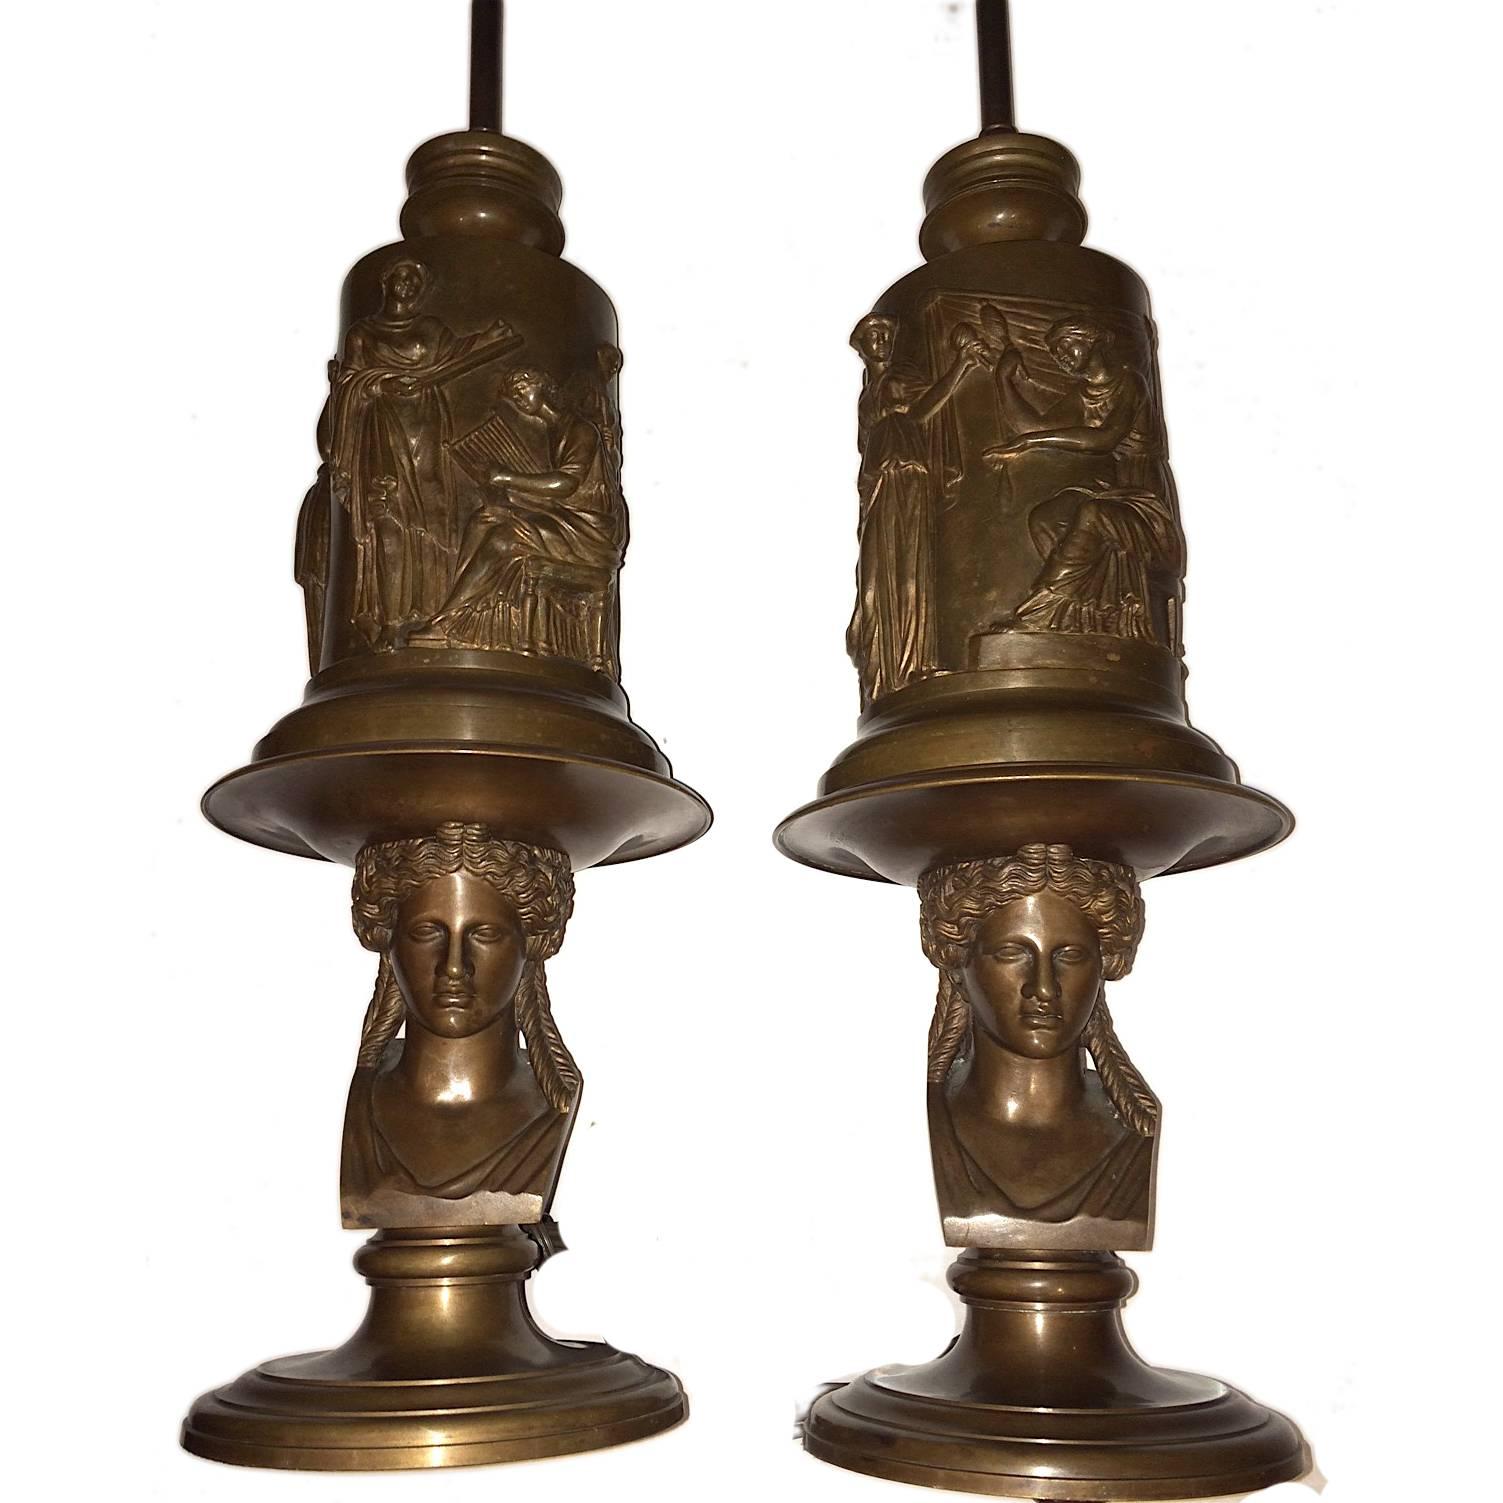 Important Barbedienne Table Lamps